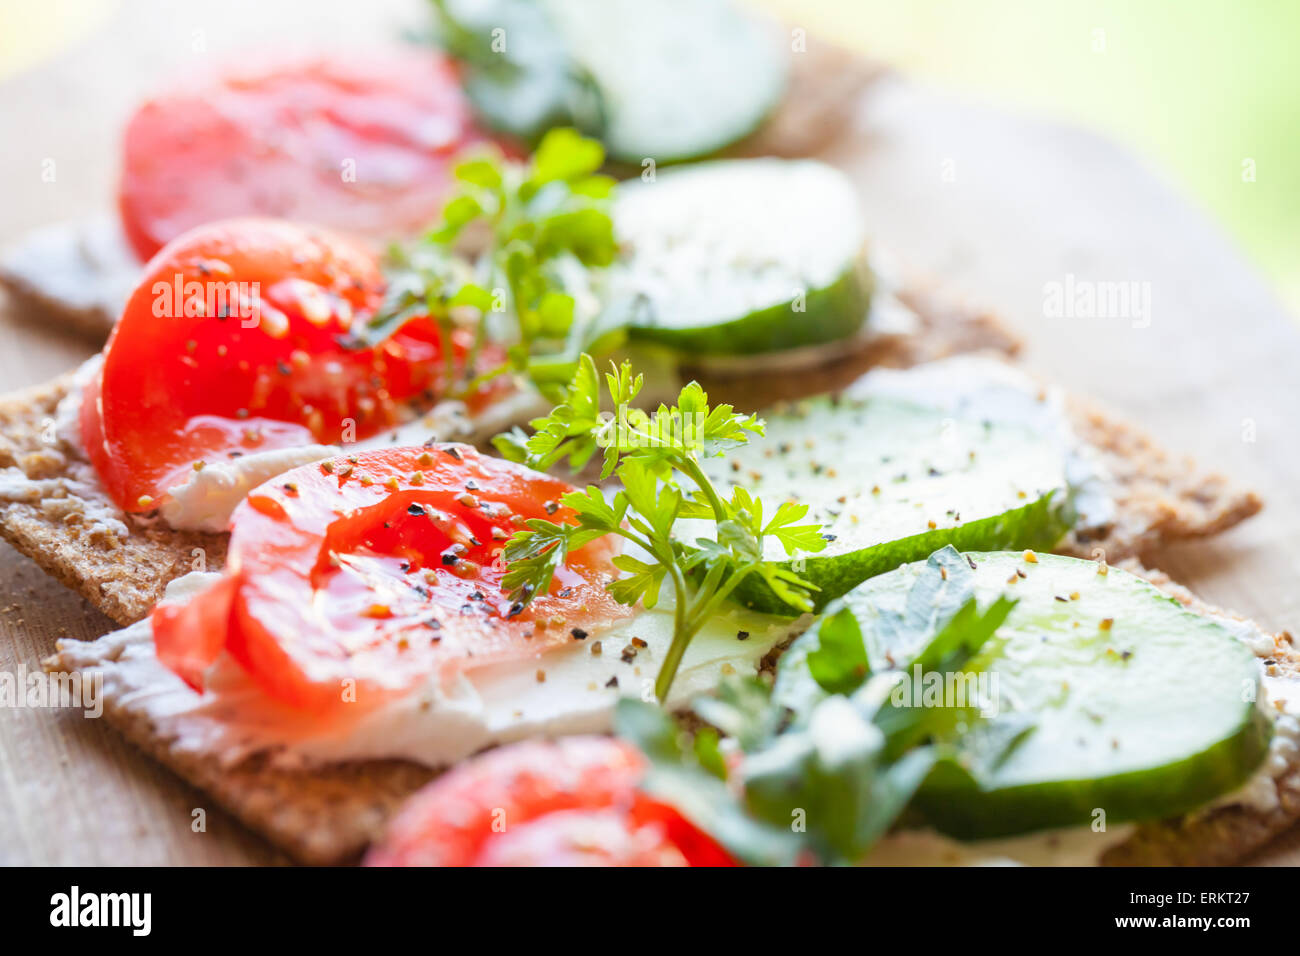 Healthy food, bright sandwiches. Finnish rye crisp bread, soft cheese, cucumber, tomato, parsley and black pepper Stock Photo